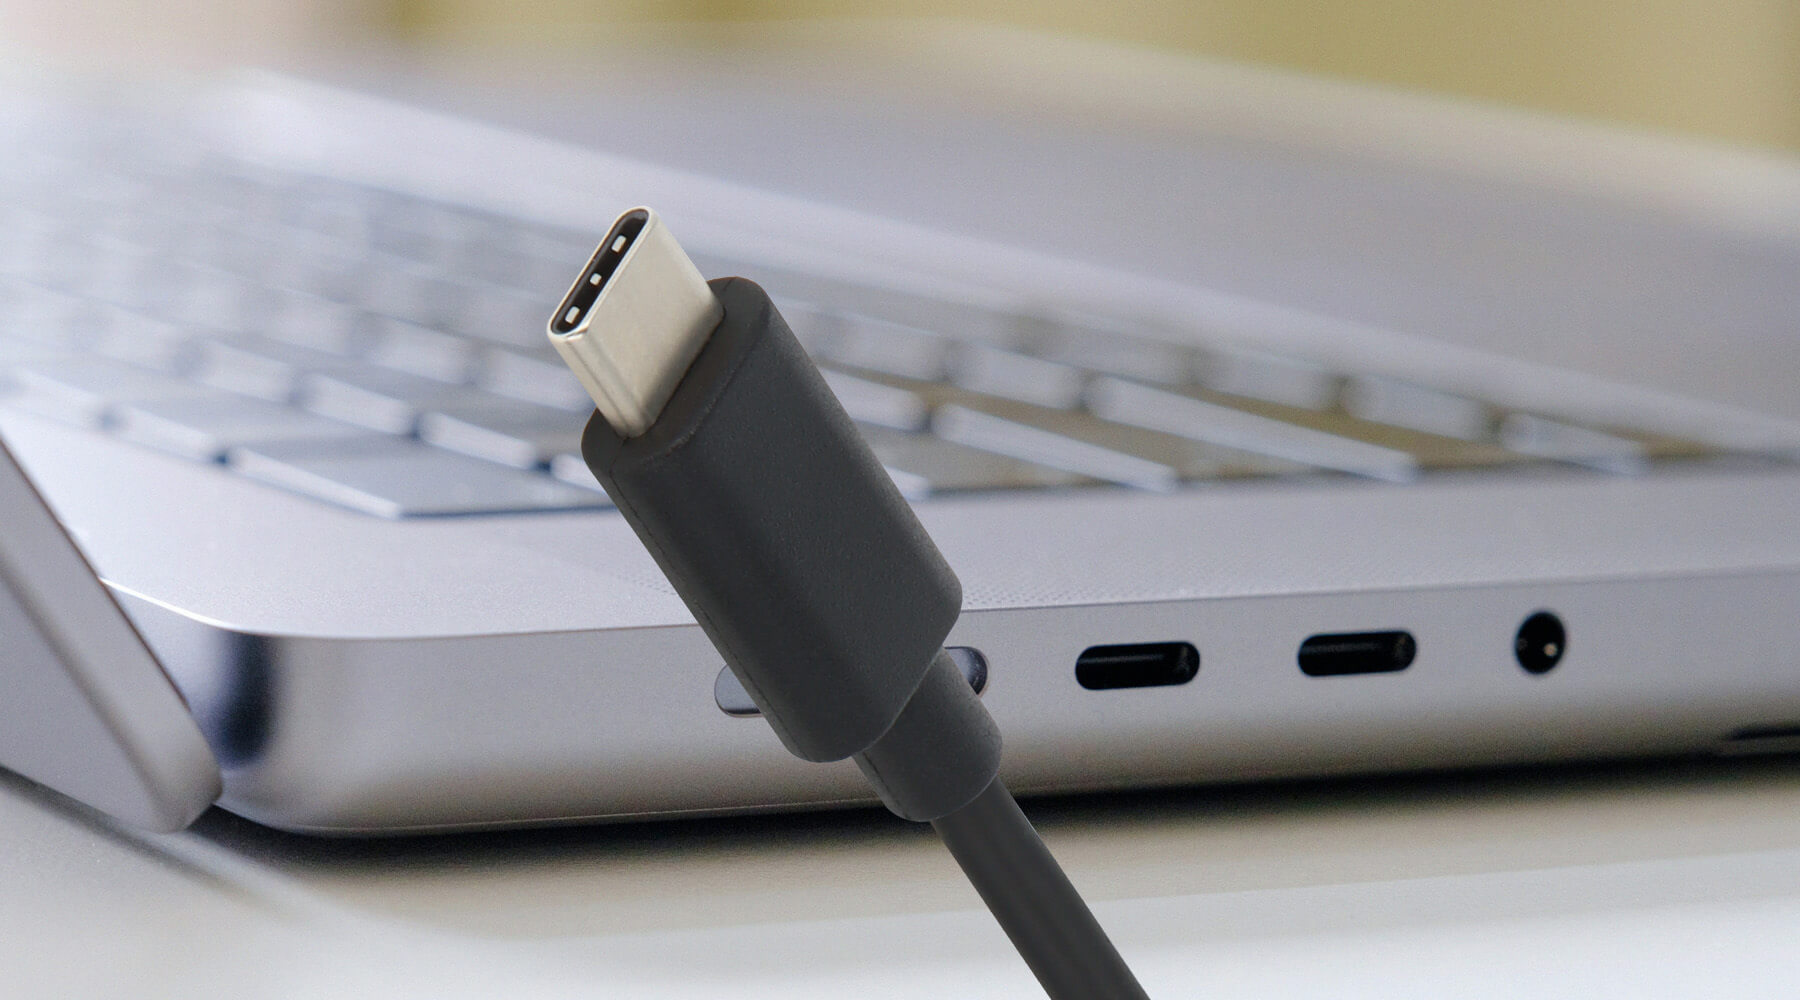 USB-C is getting a major speed boost with USB 4